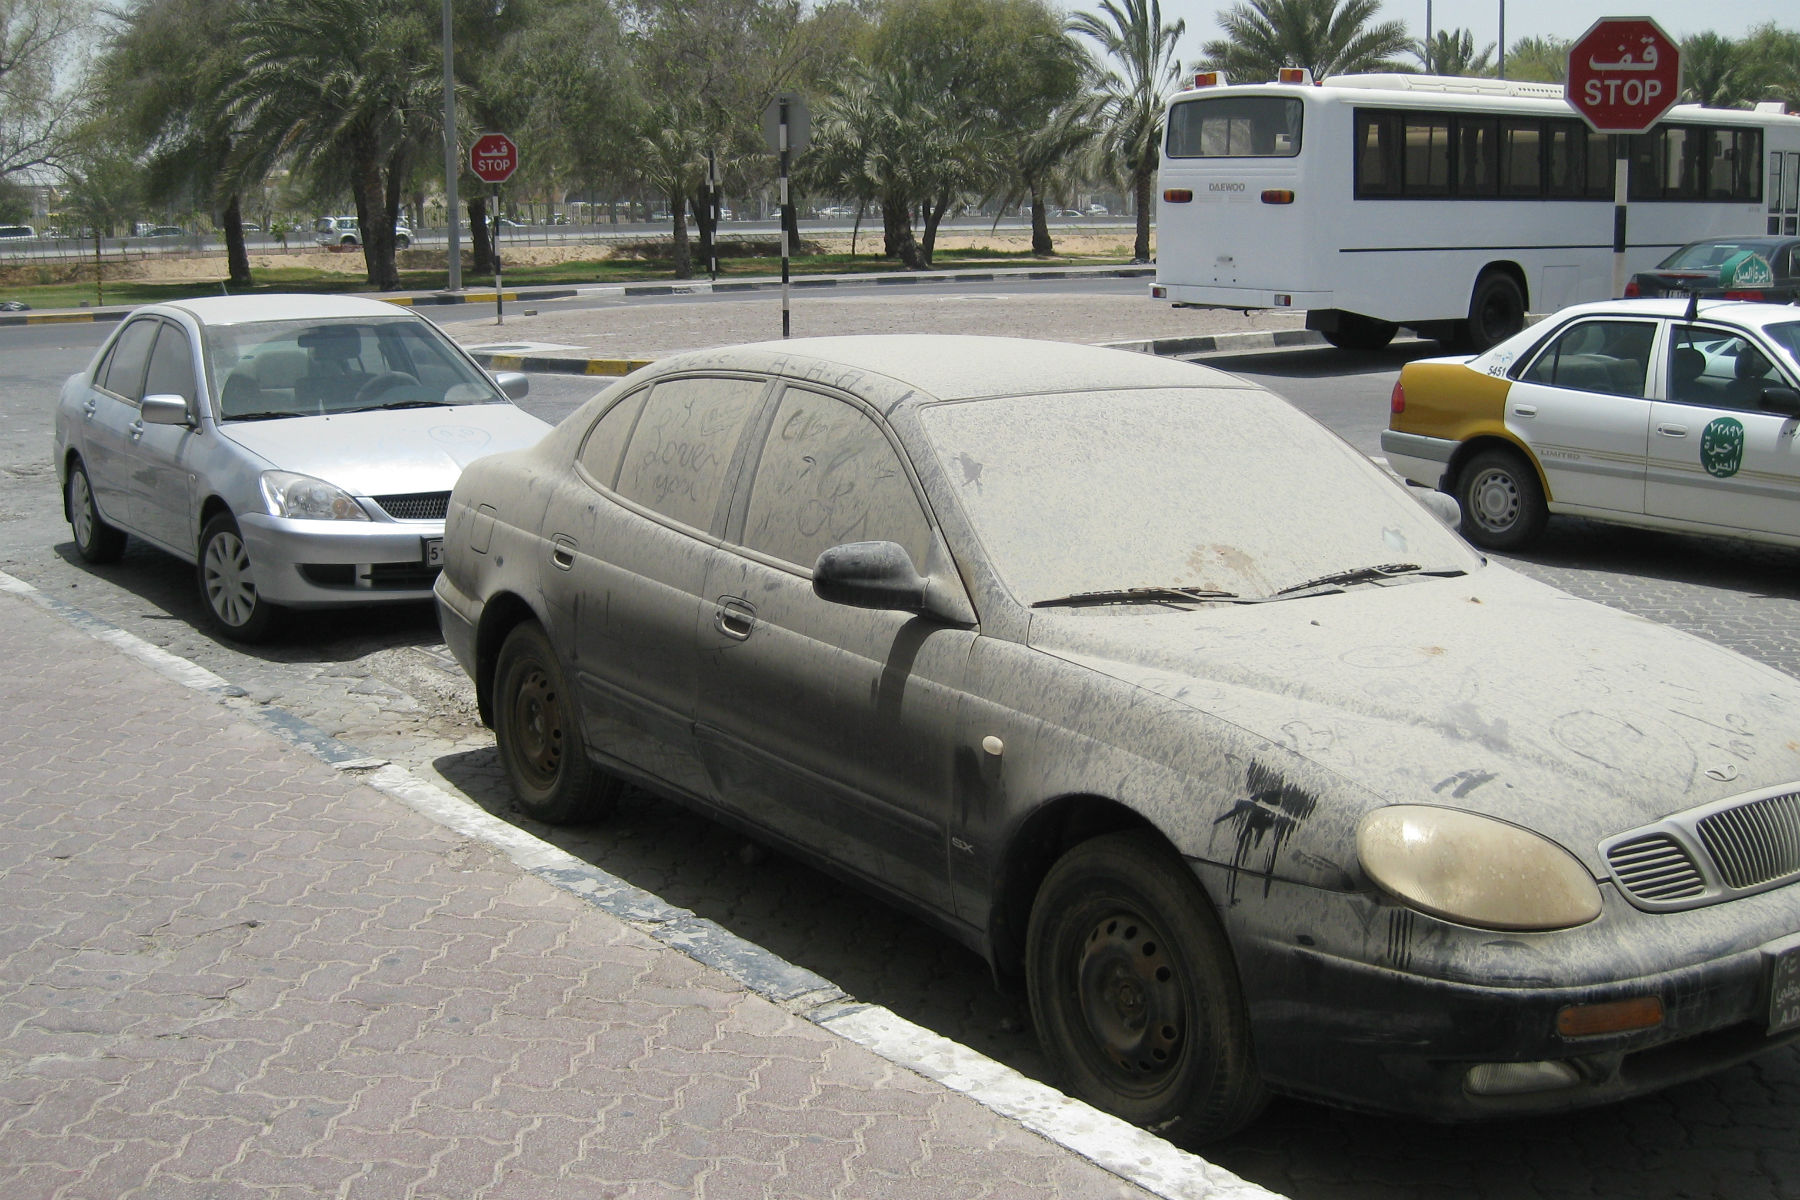 Abu Dhabi officials are towing away dirty cars